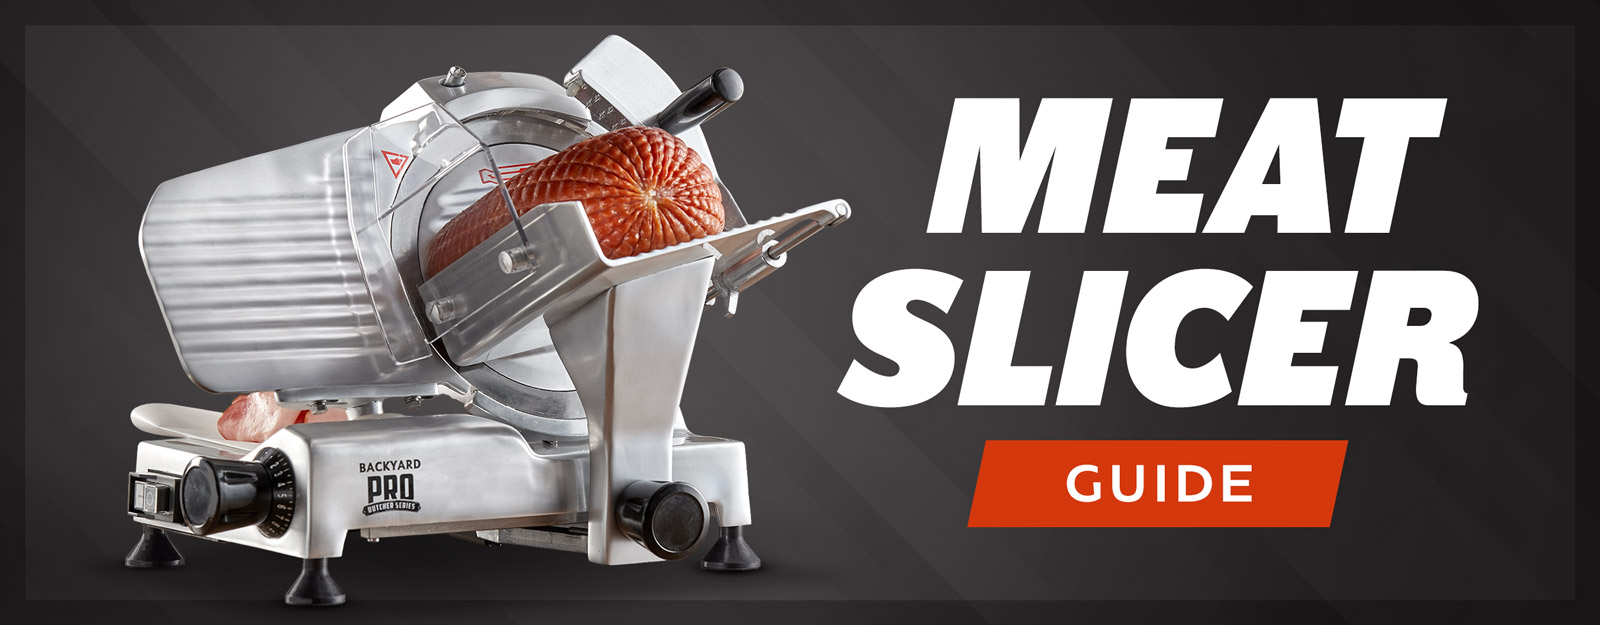 Meat Slicers Buying Guide